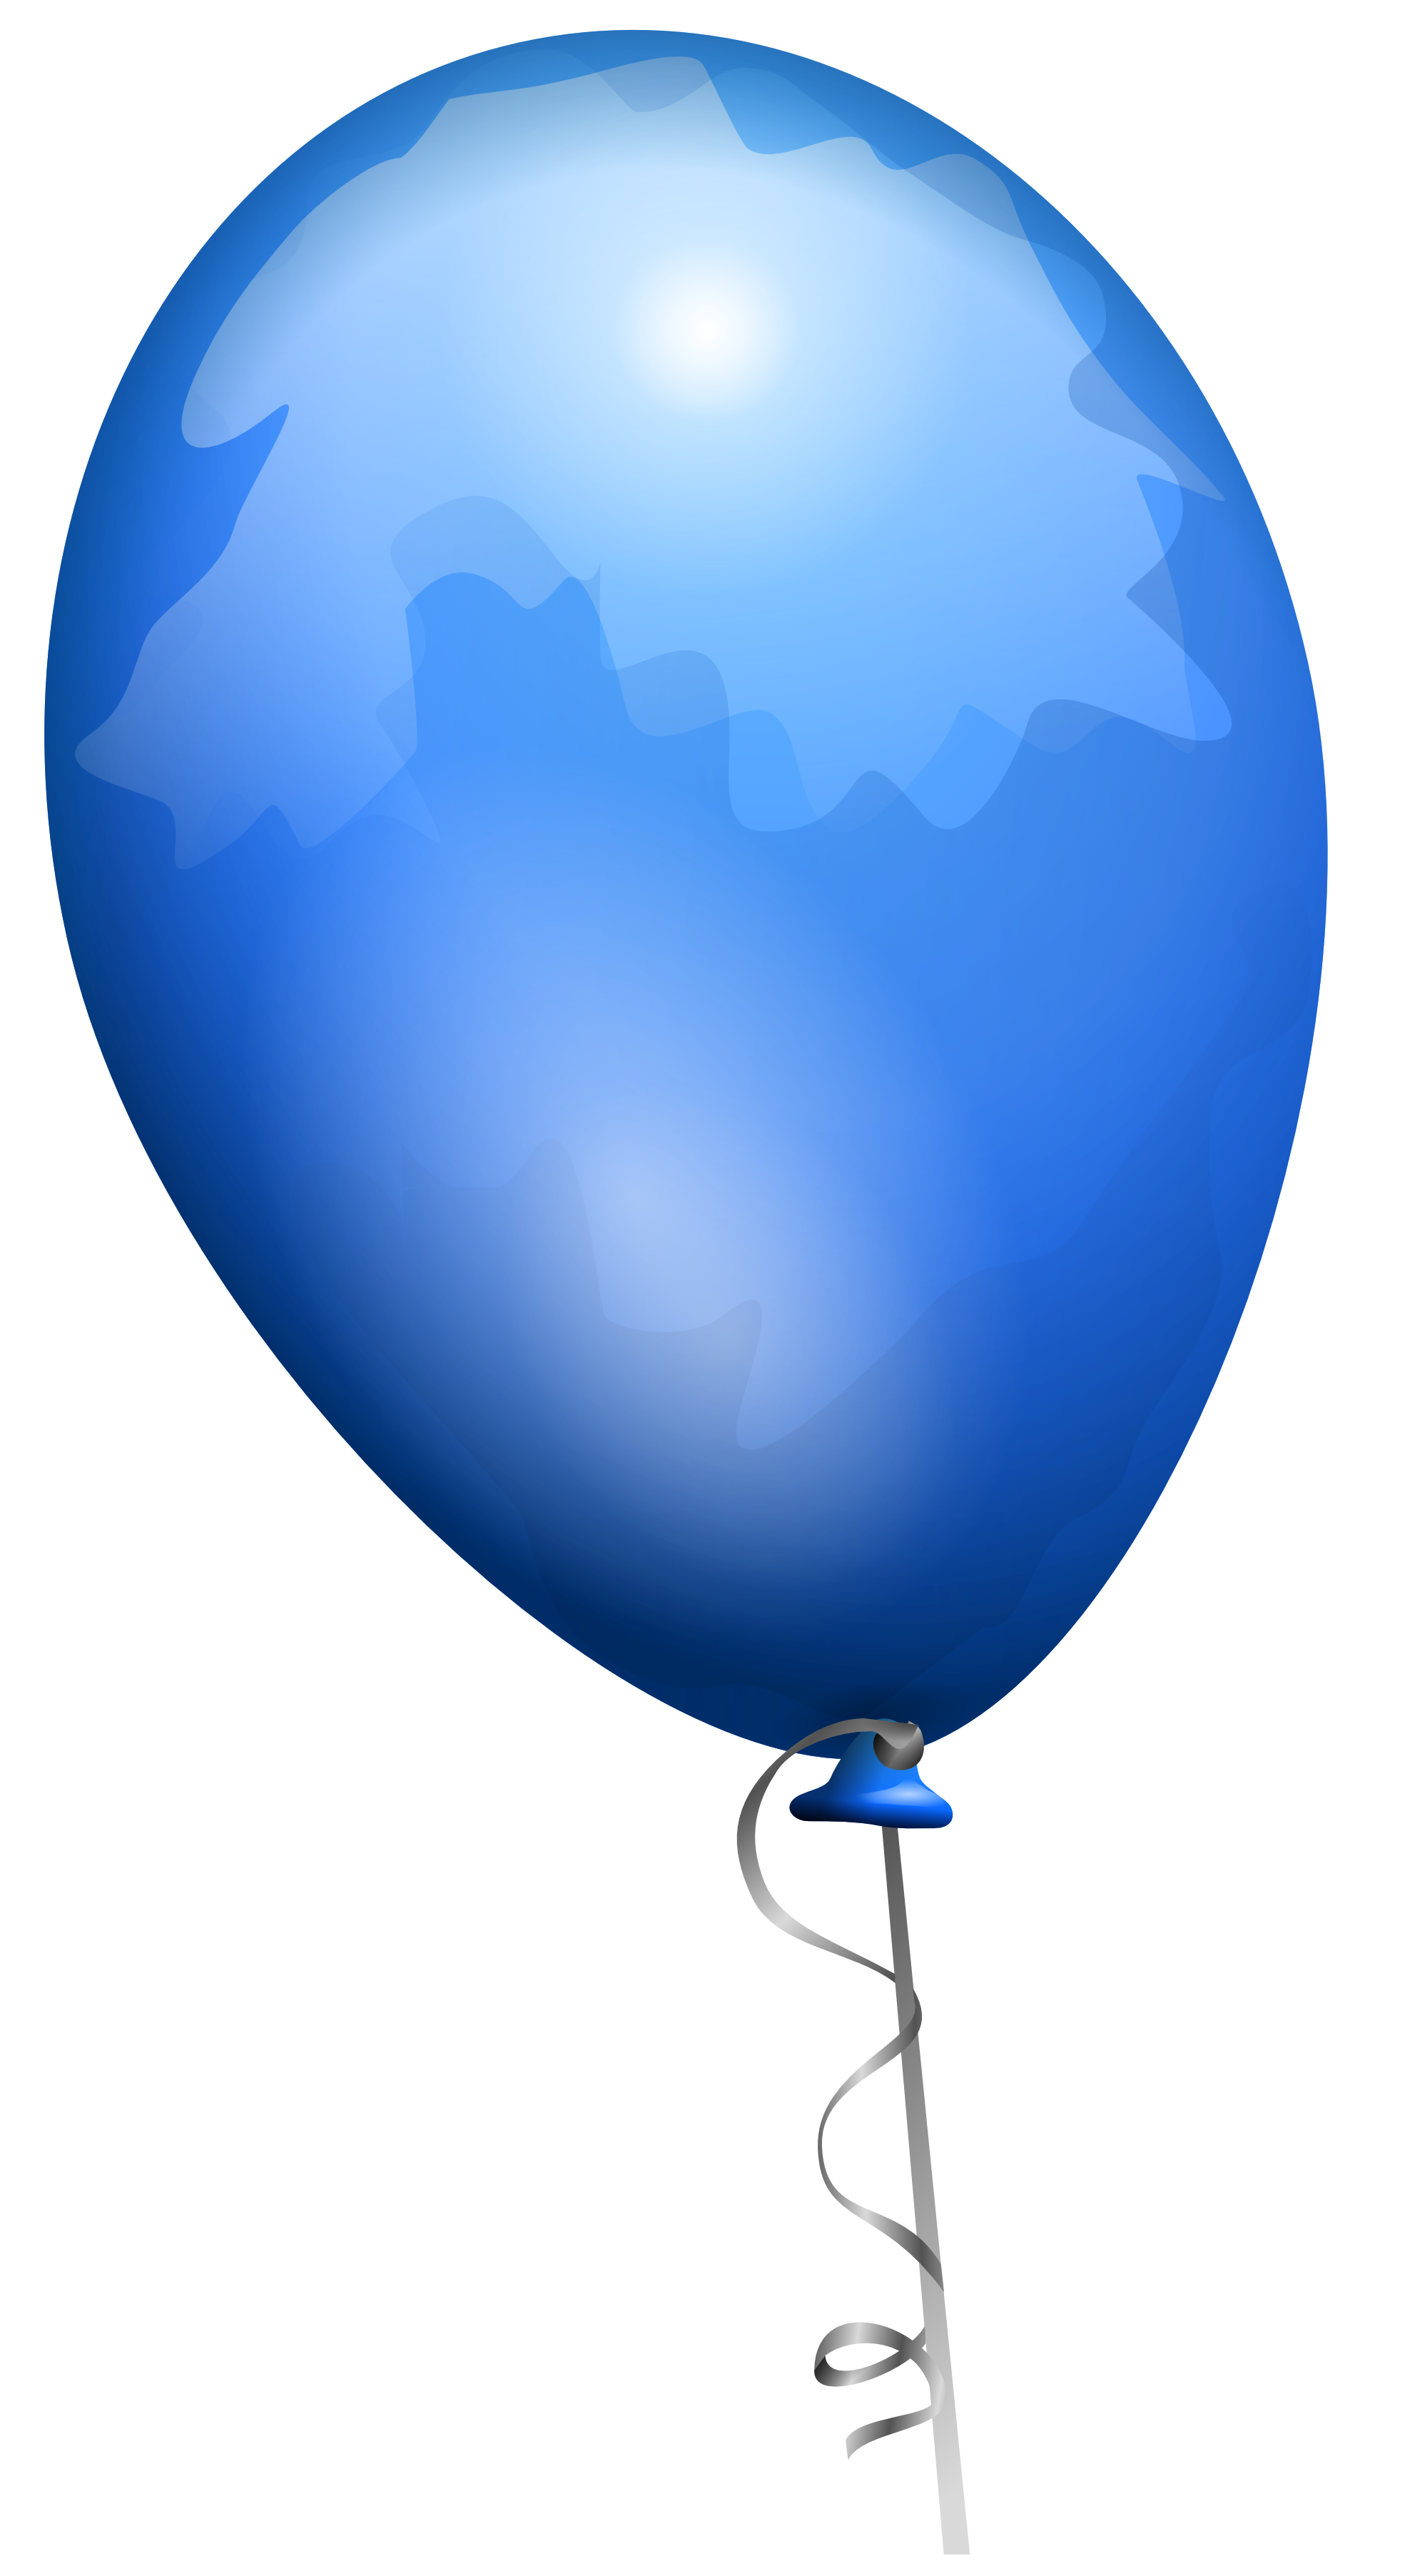 Red Balloon Png Image, Free Download - One Balloon, Transparent background PNG HD thumbnail